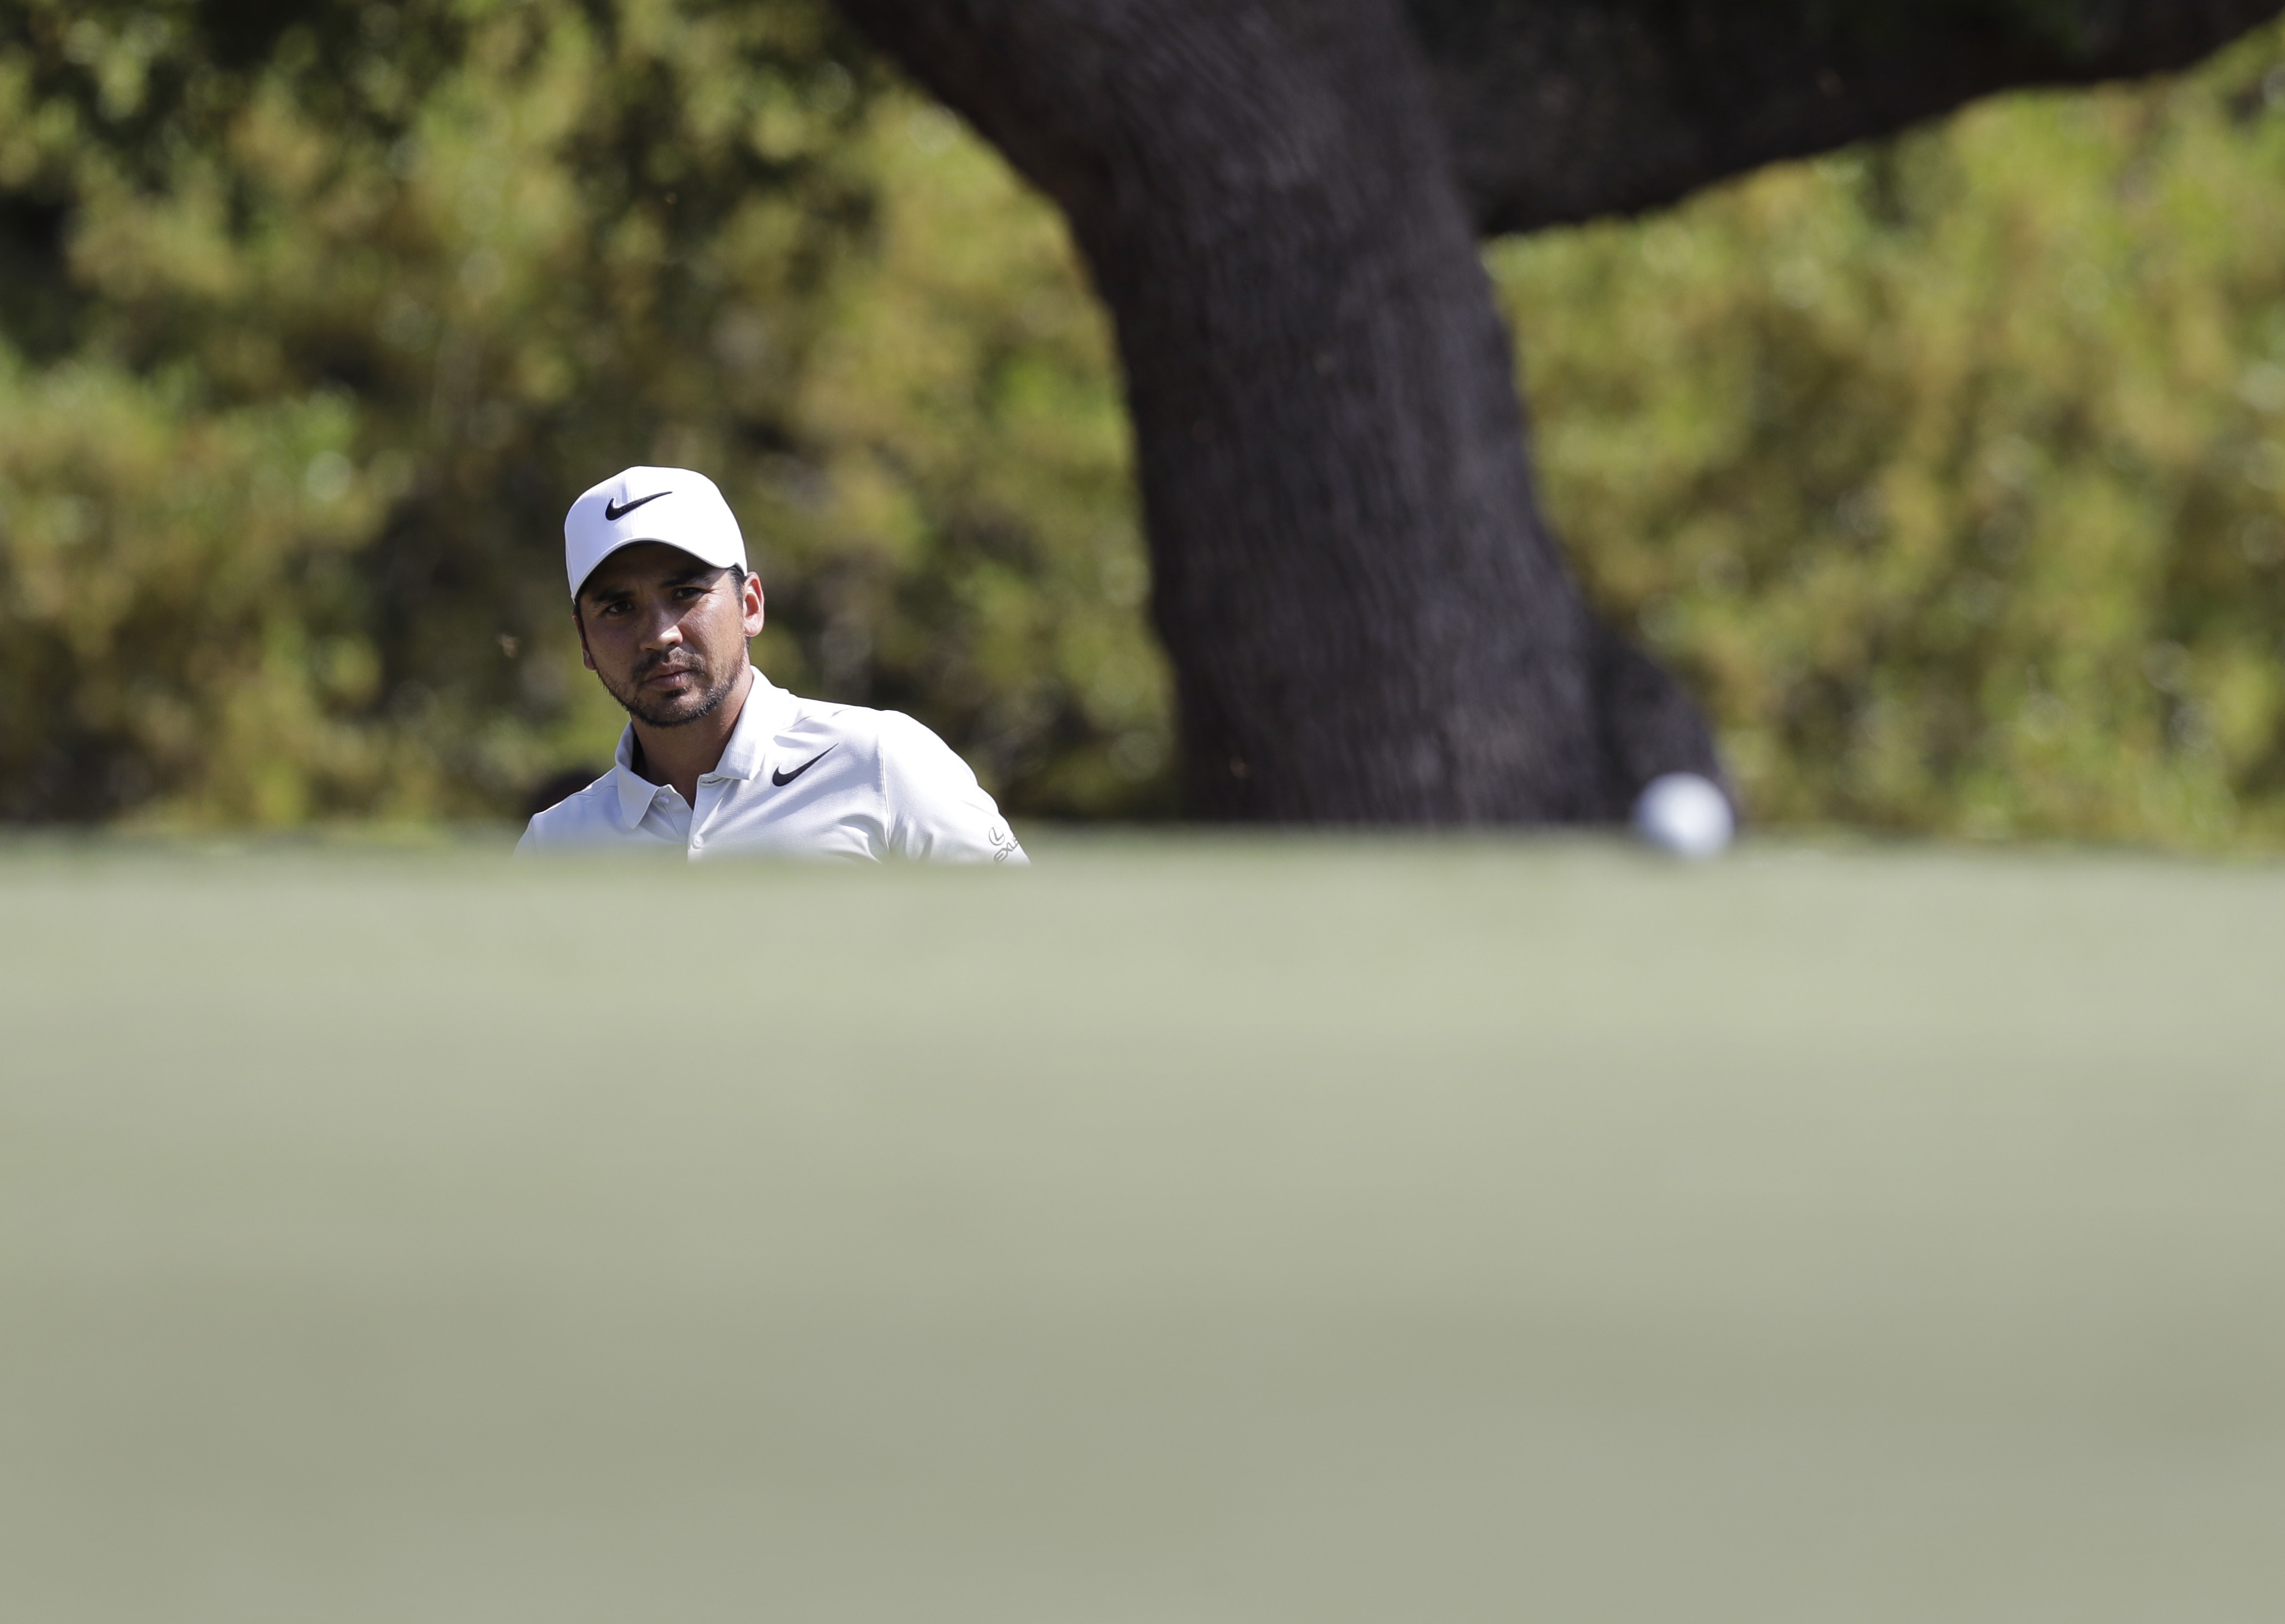 Defending champion Jason Day, of Australia, watches his putt on the sixth hole during round-robin play at the Dell Technologies Match Play golf tournament at Austin County Club, Wednesday, March 22, 2017, in Austin, Texas. Day conceded to Pat Perez after the hole and withdrew from the tournament. (AP Photo/Eric Gay)